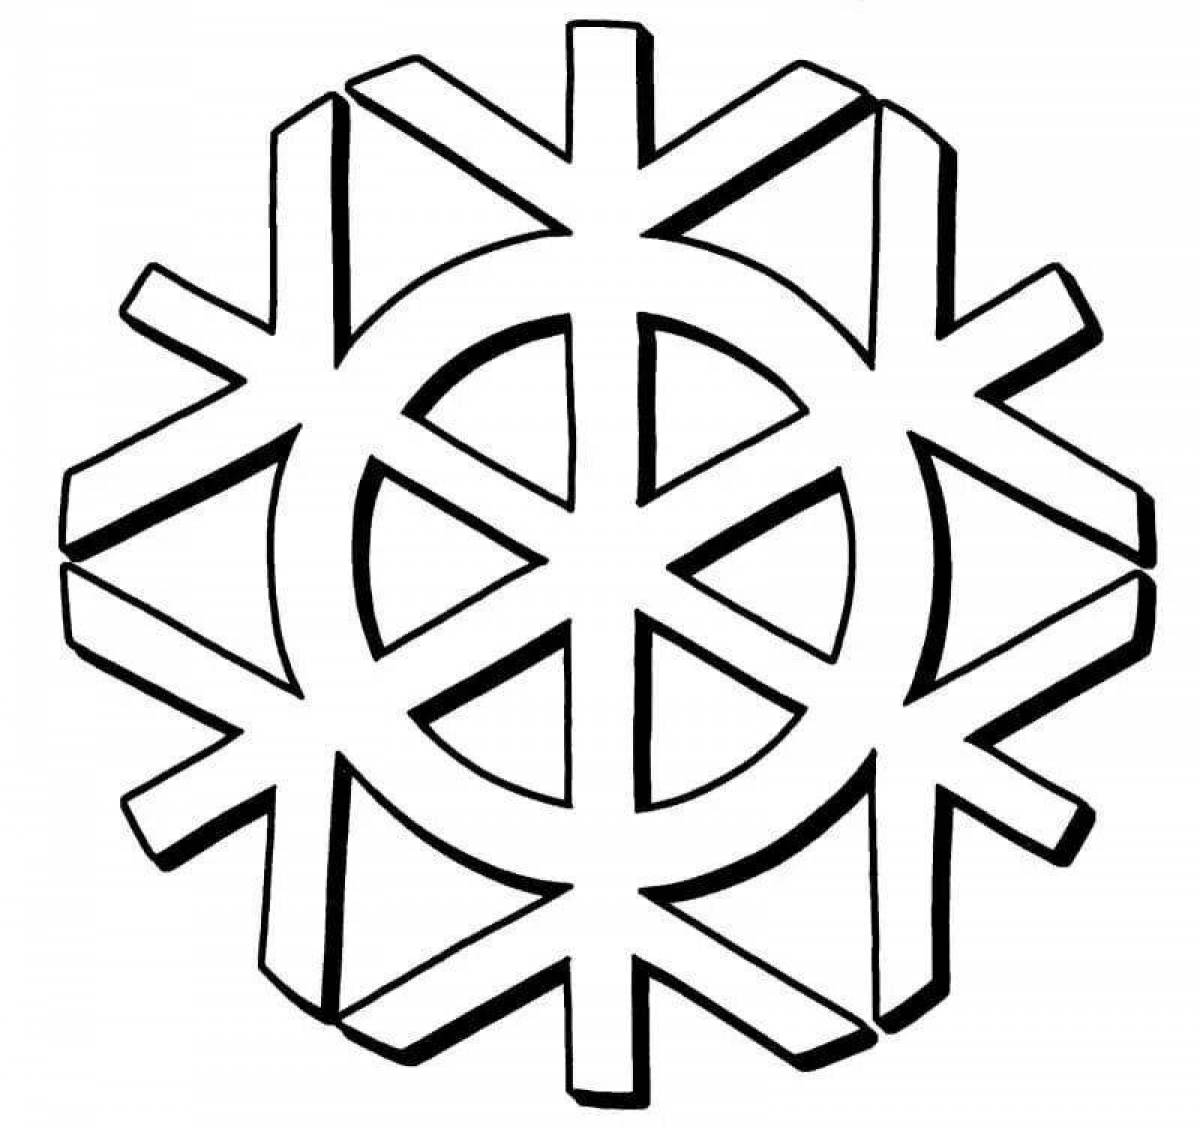 Coloring page energetic snowflake for kids